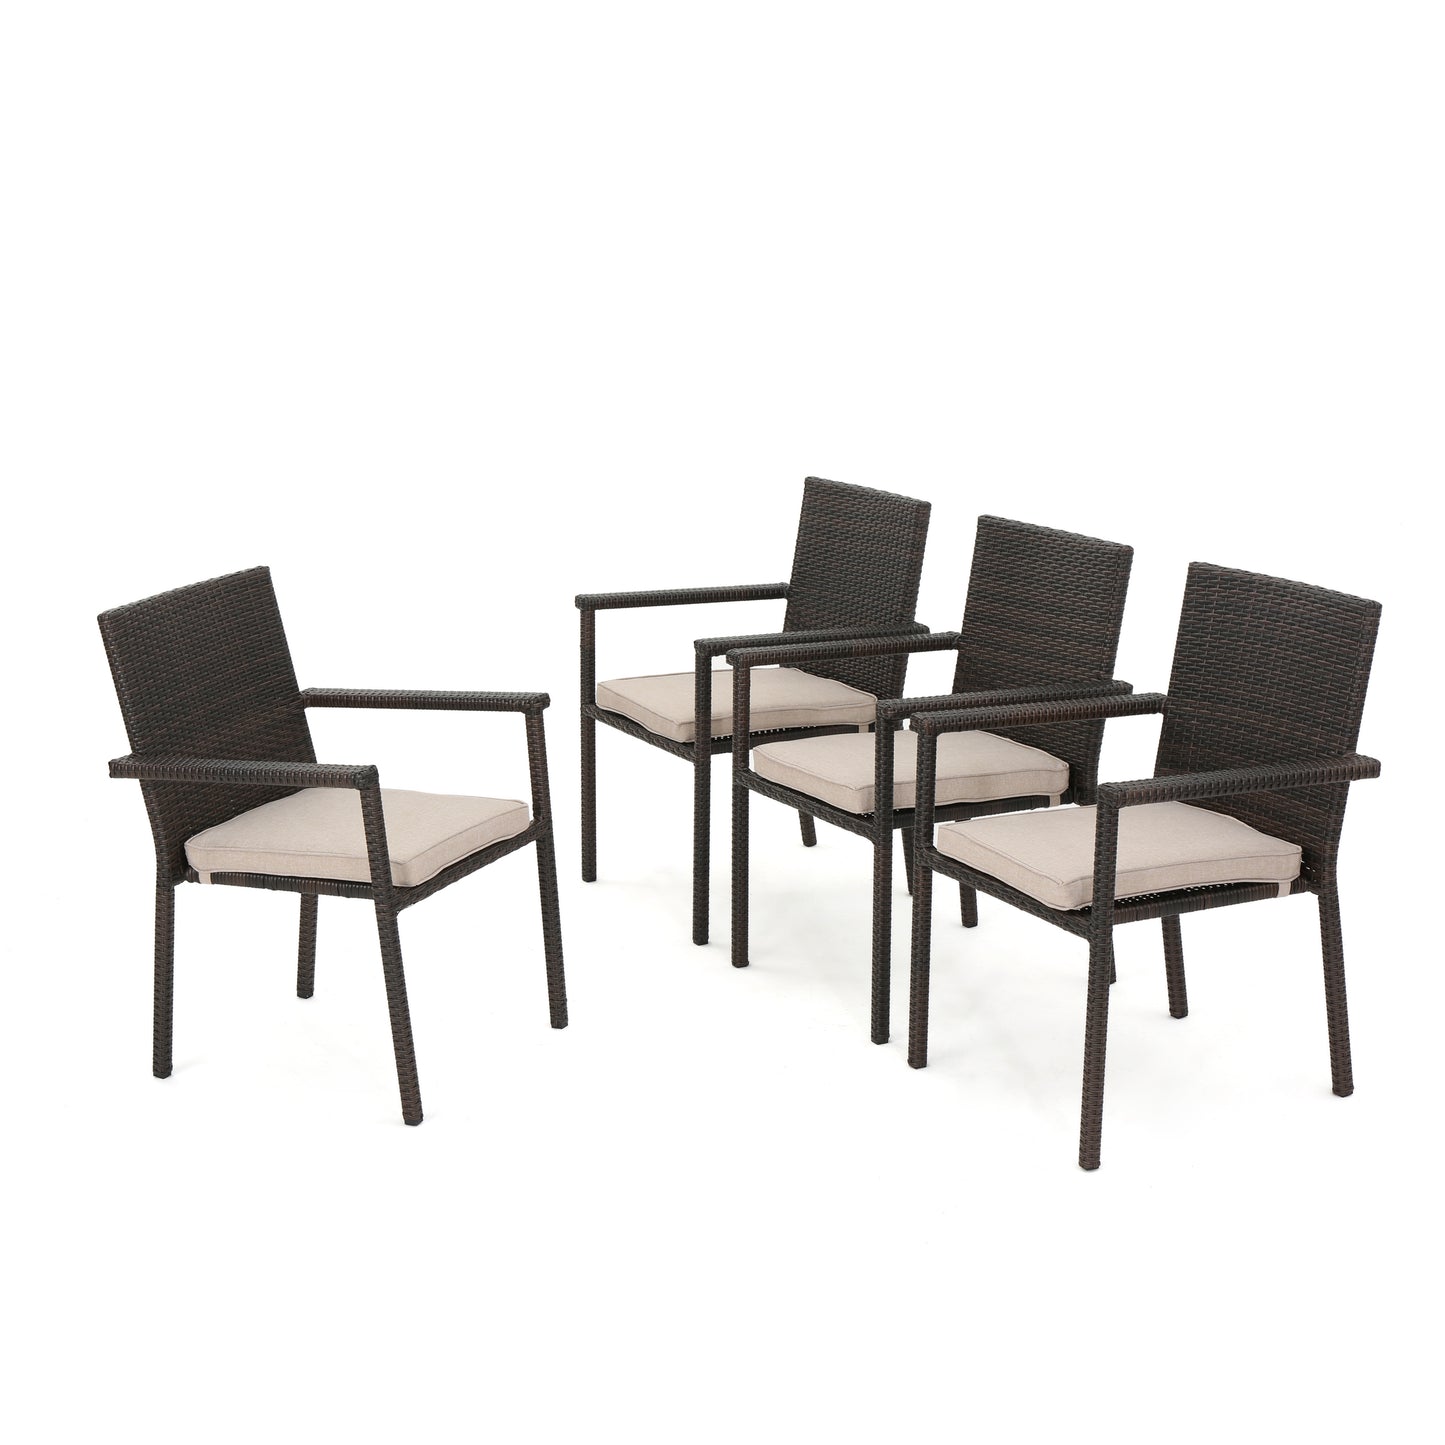 San Tropez Outdoor Dining Chairs with Water Resistant Cushions (Set of 4)